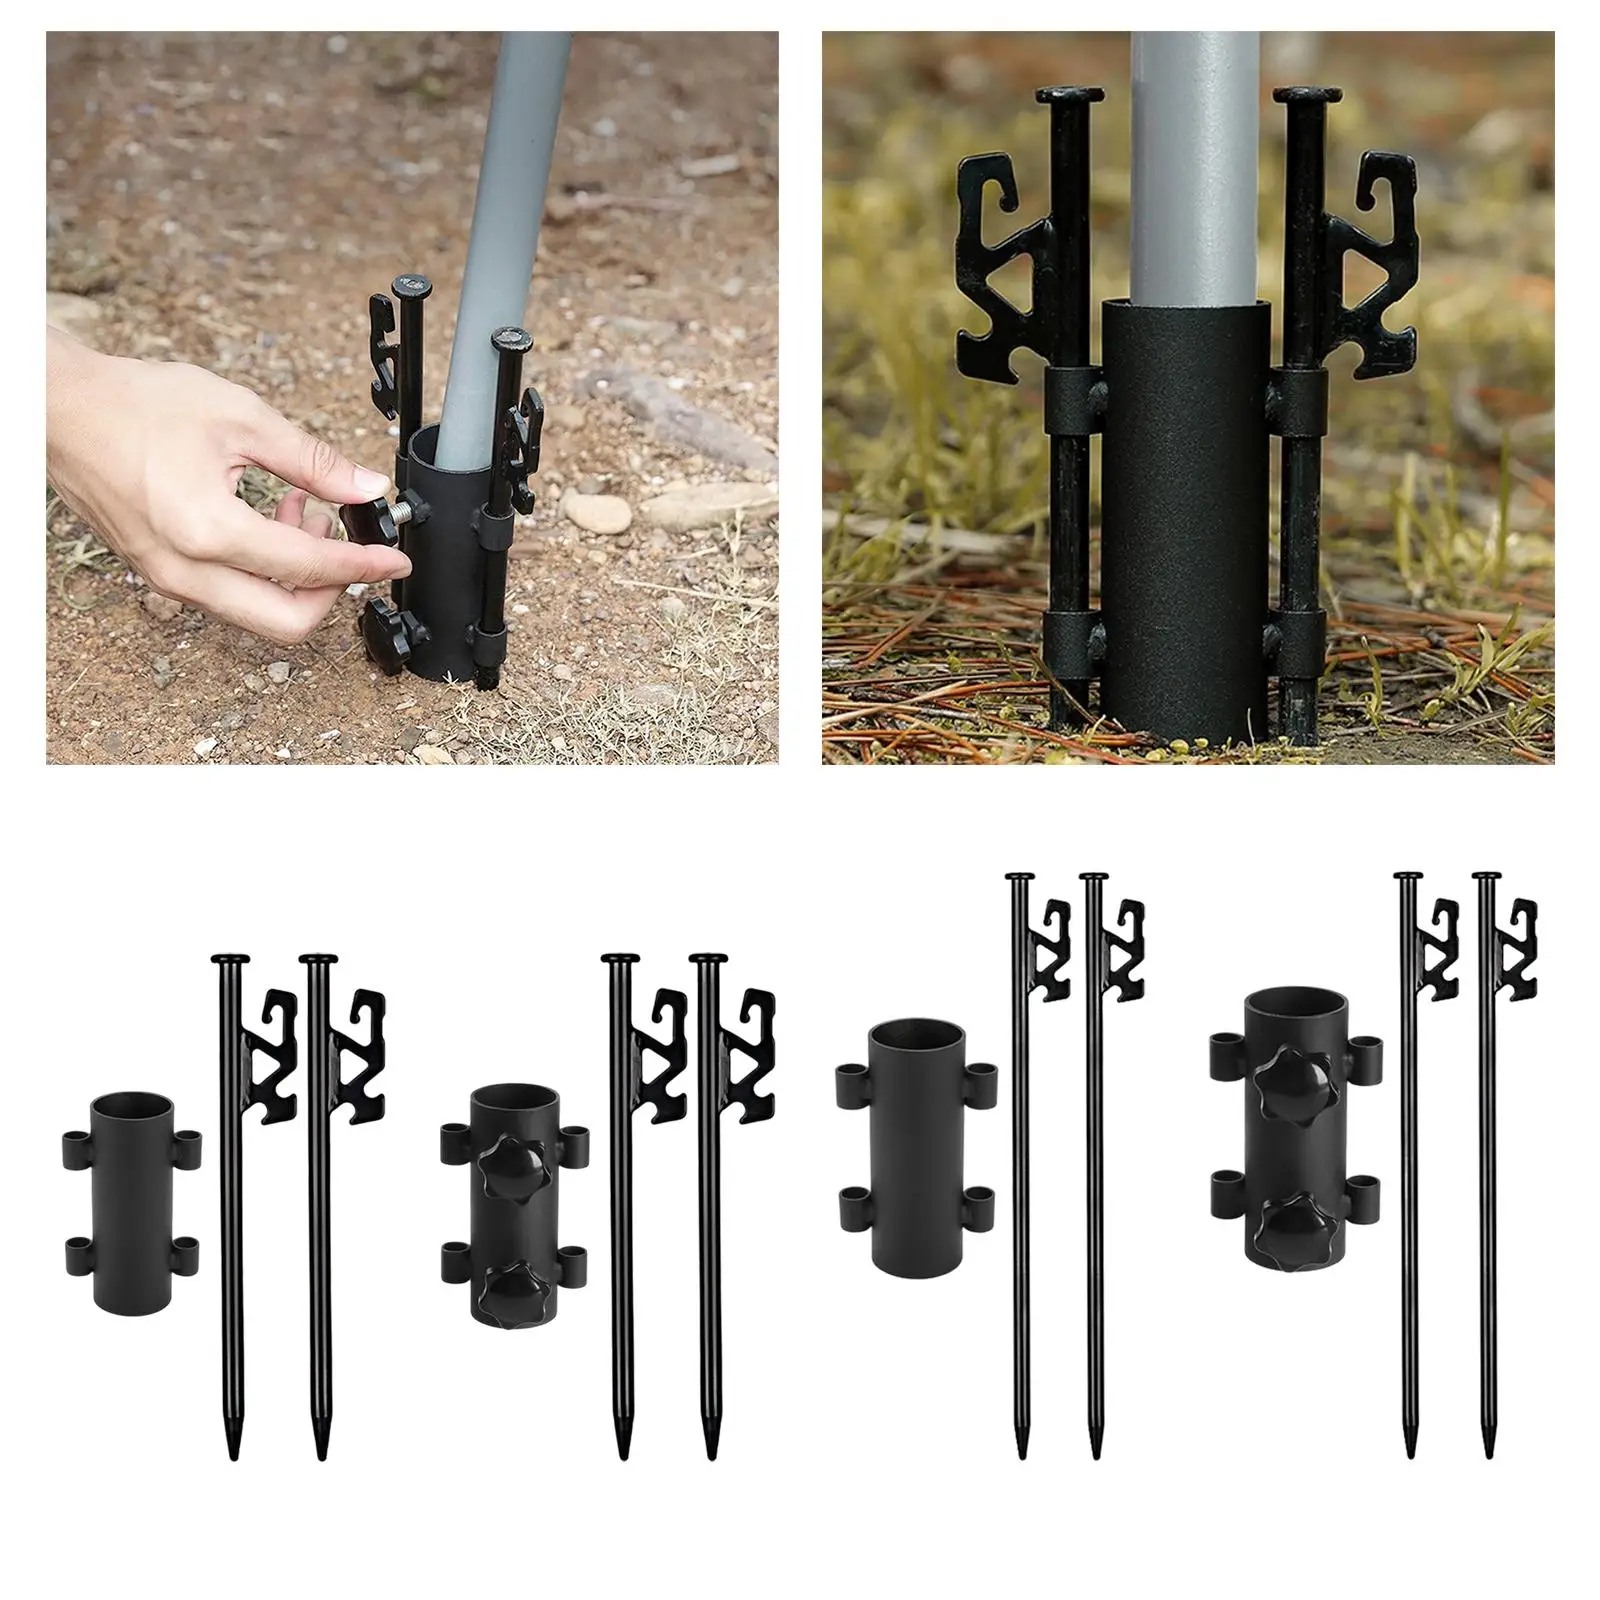 2Pcs Camping Tent Stakes Pins Spikes Heavy Duty Canopy Ground Nails Practical Tarp with Pole Fixed Tube for Outdoor Picnic